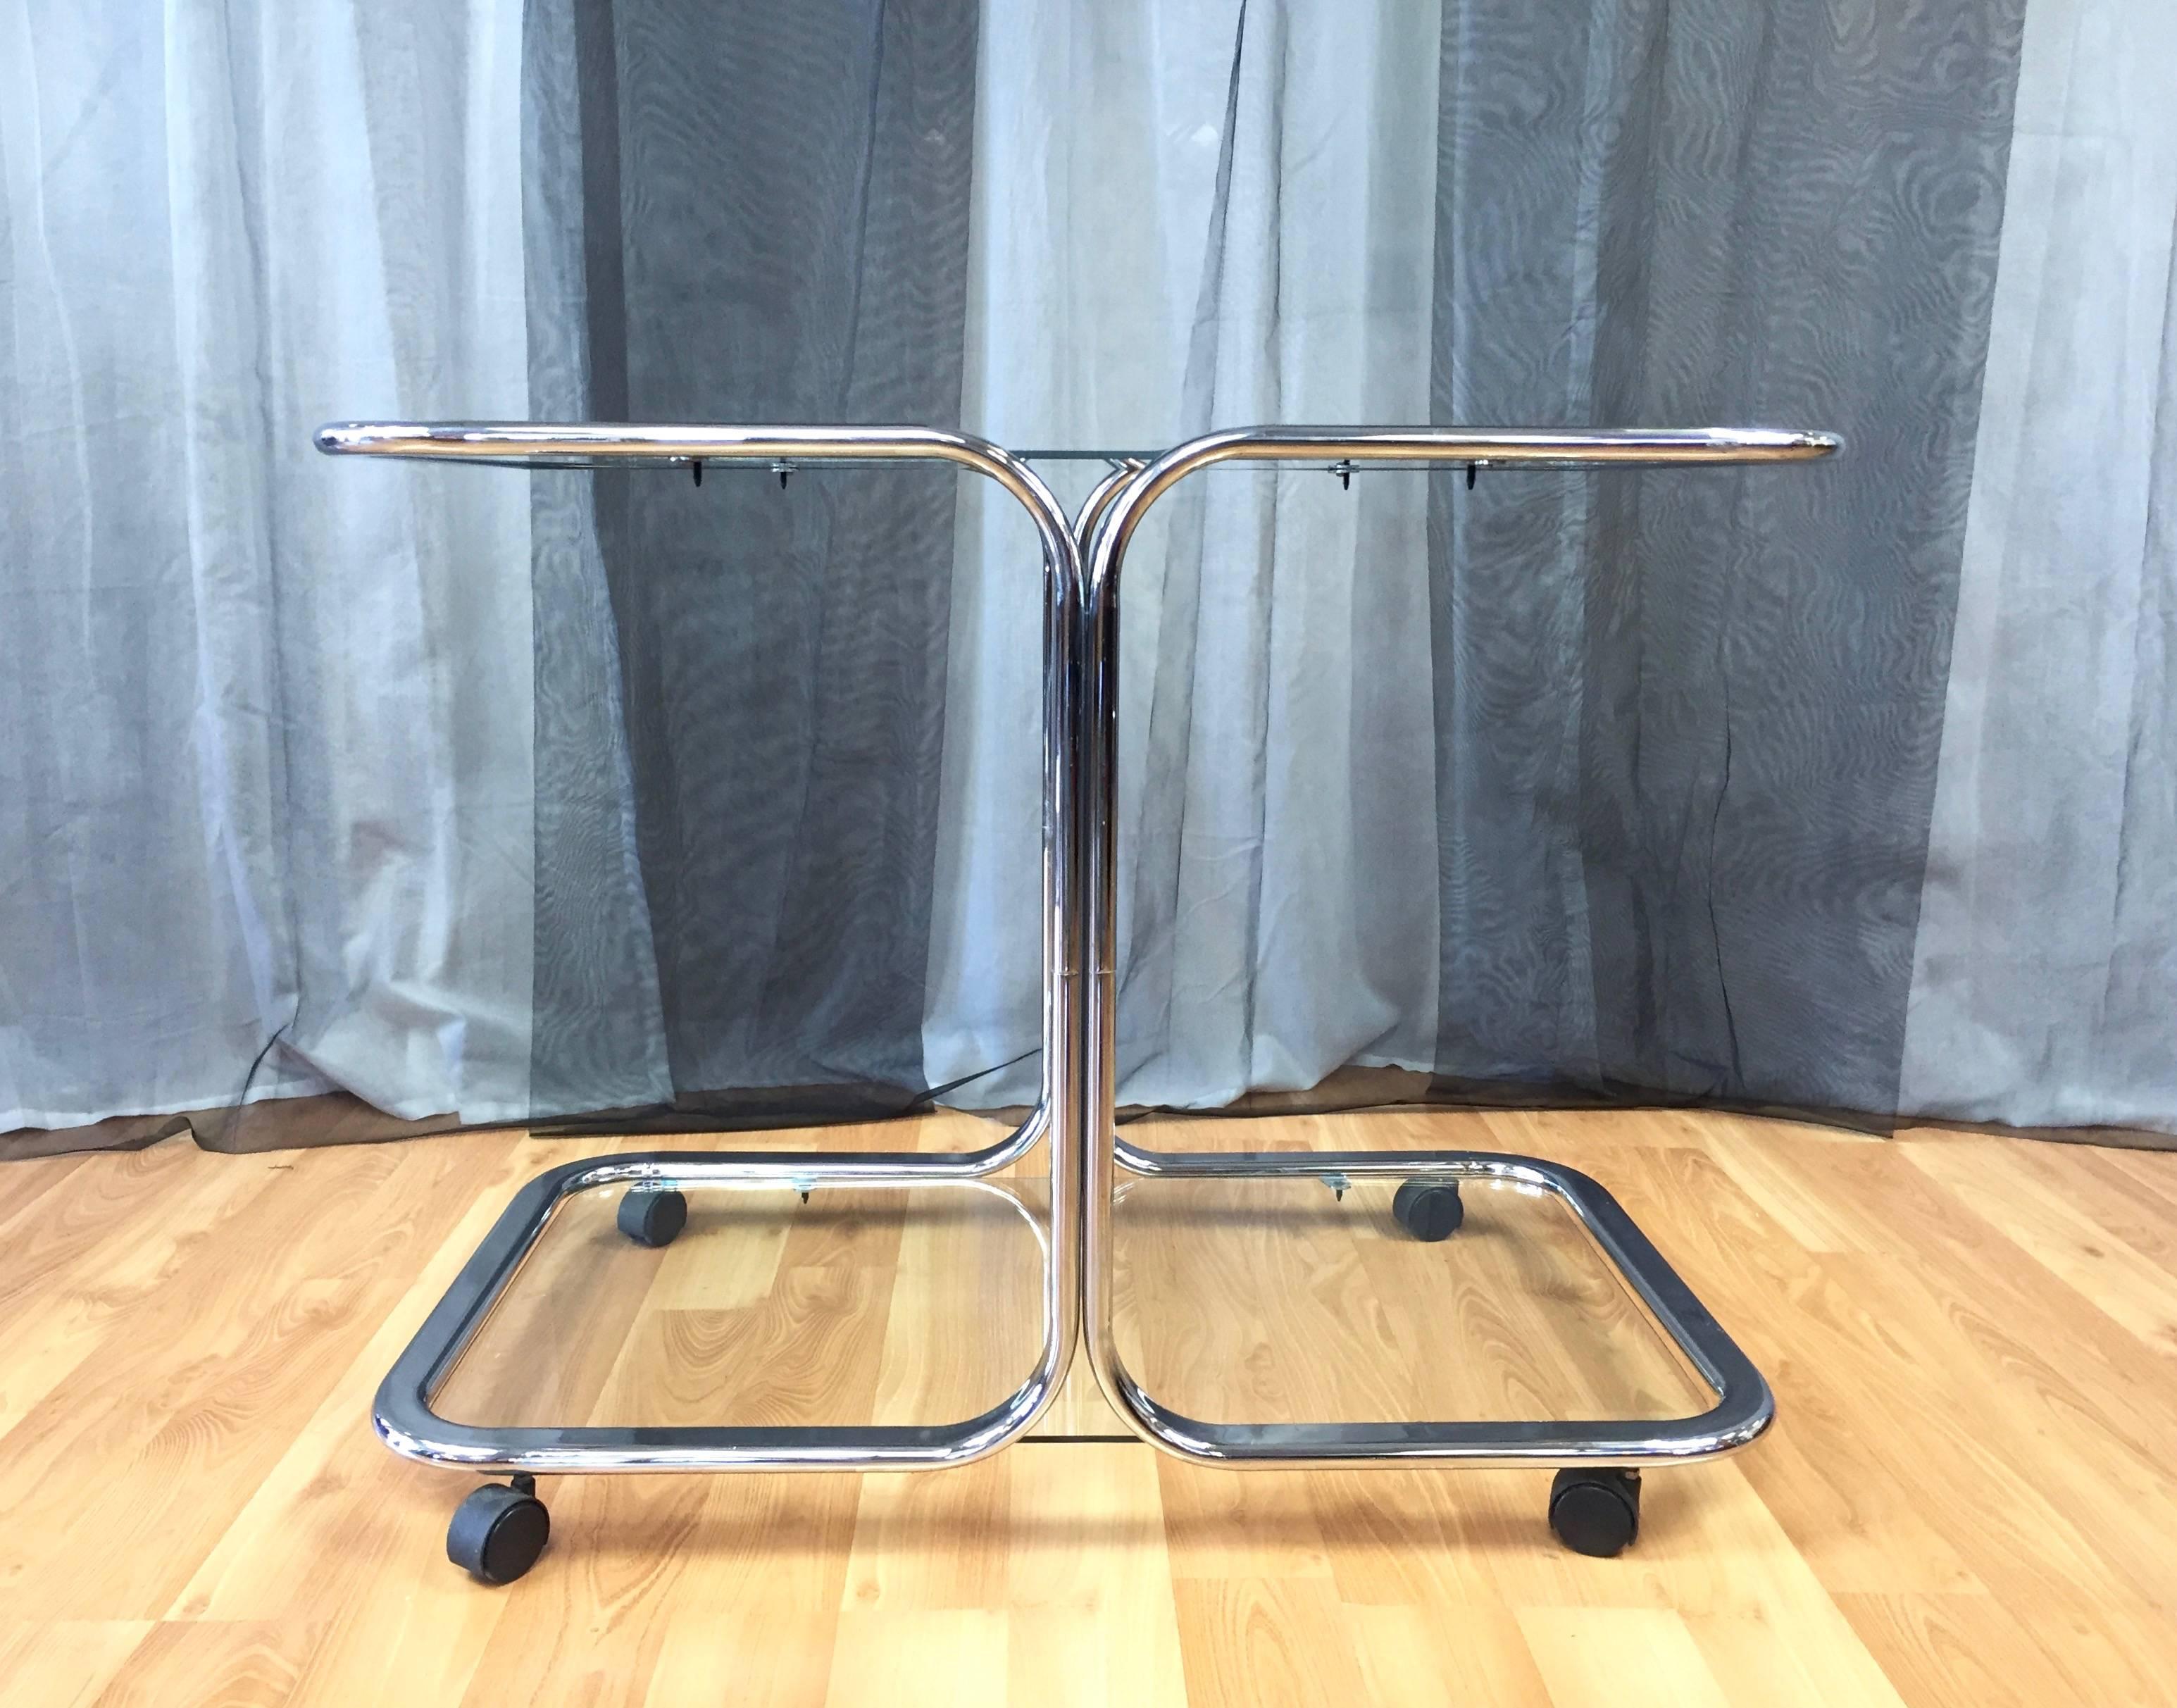 An exceptionally sleek and Minimalist two-tier chrome and glass bar or serving cart in the manner of Milo Baughman and Design Institute America.

Continuous round-edge flat bar chrome halves mirror each other, and support two expansive glass